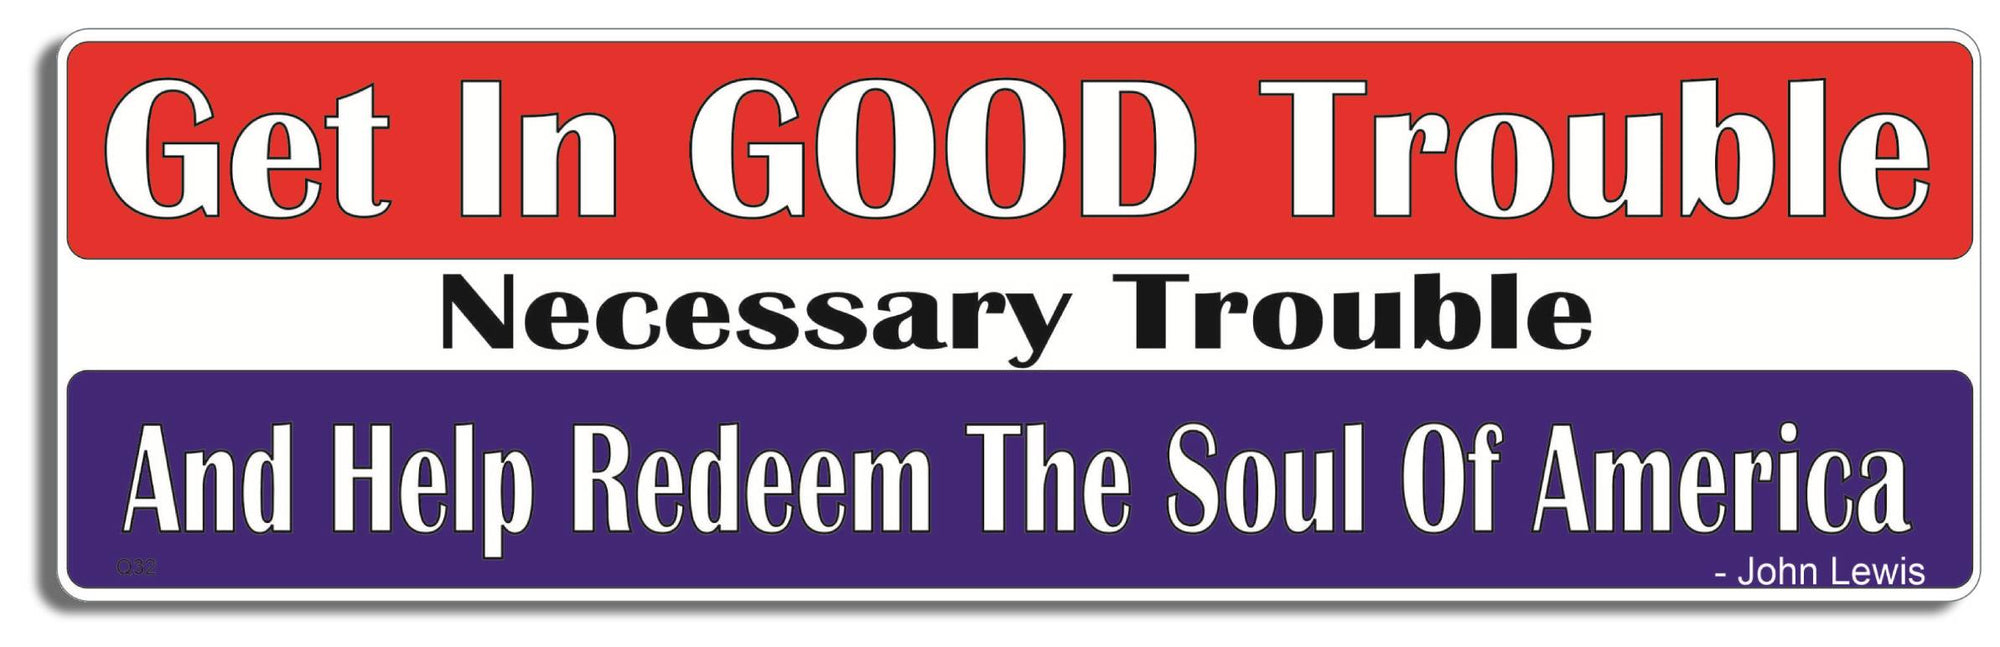 Get In Good Trouble, Necessary Trouble, And Help Redeem The Soul Of America - John Lewis - 3" x 10" -  Decal Bumper Sticker-quotation Bumper Sticker Car Magnet Get In Good Trouble, Necessary Trouble-  Decal for carsquotation, quote